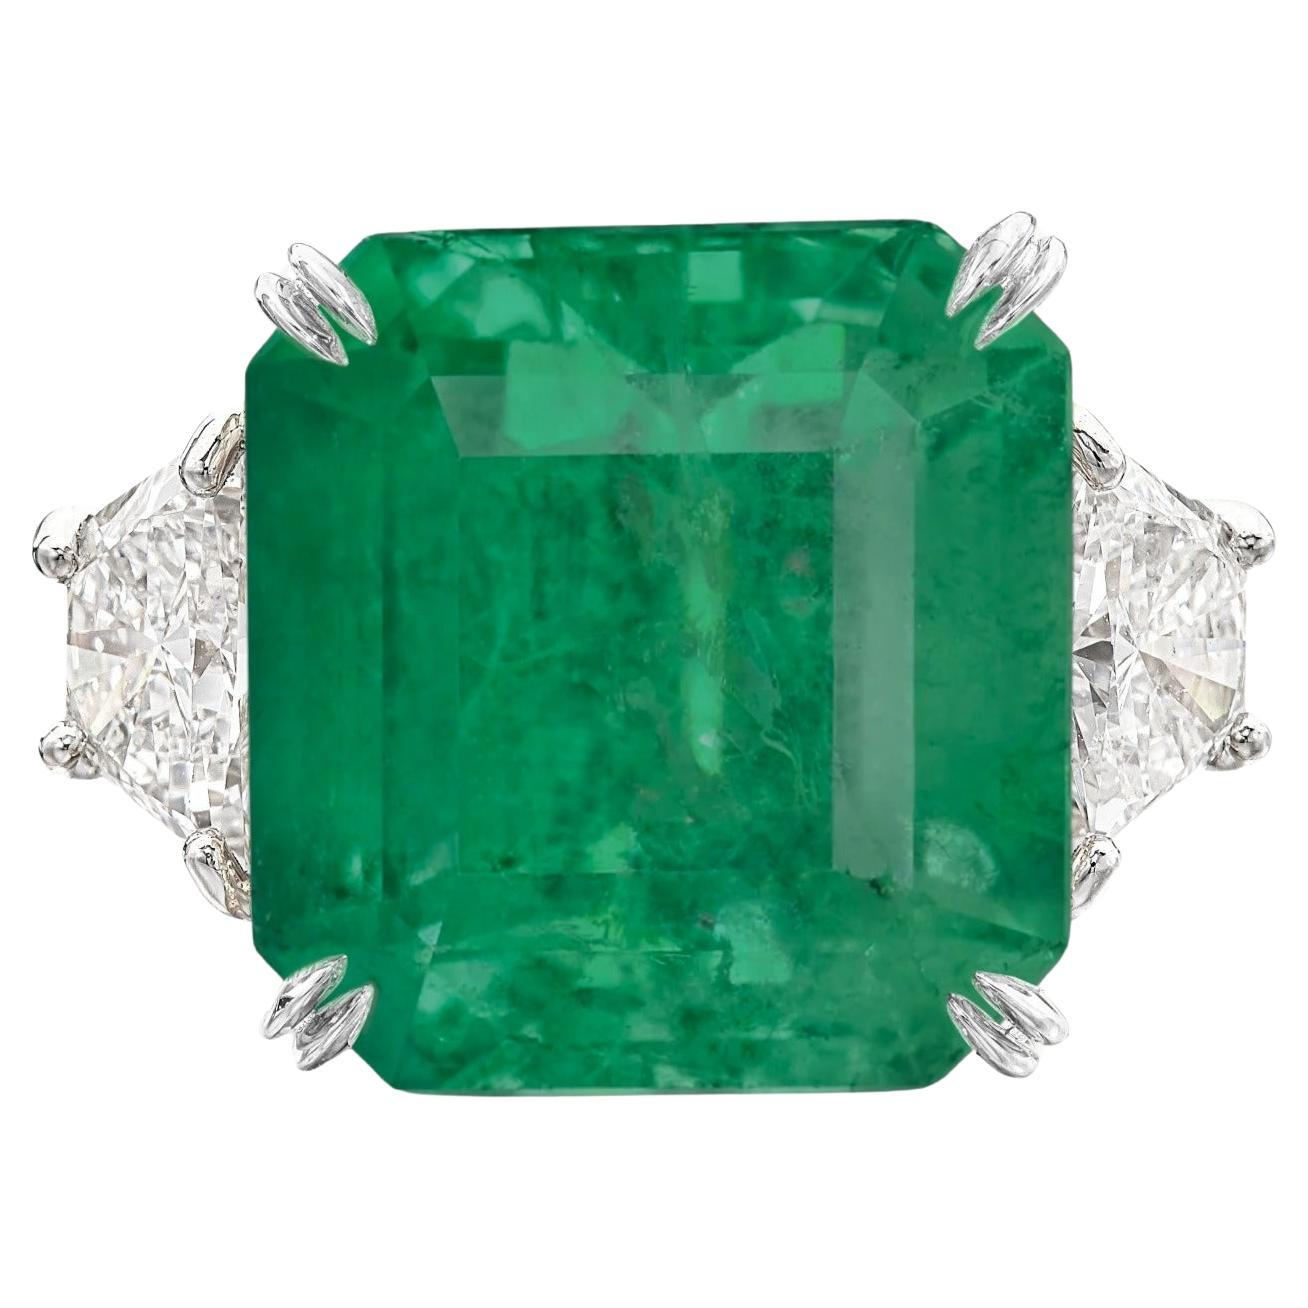 EXCEPTIONAL VIVID GREEN 6 Carat Colombian Emerald Diamond Ring For Sale